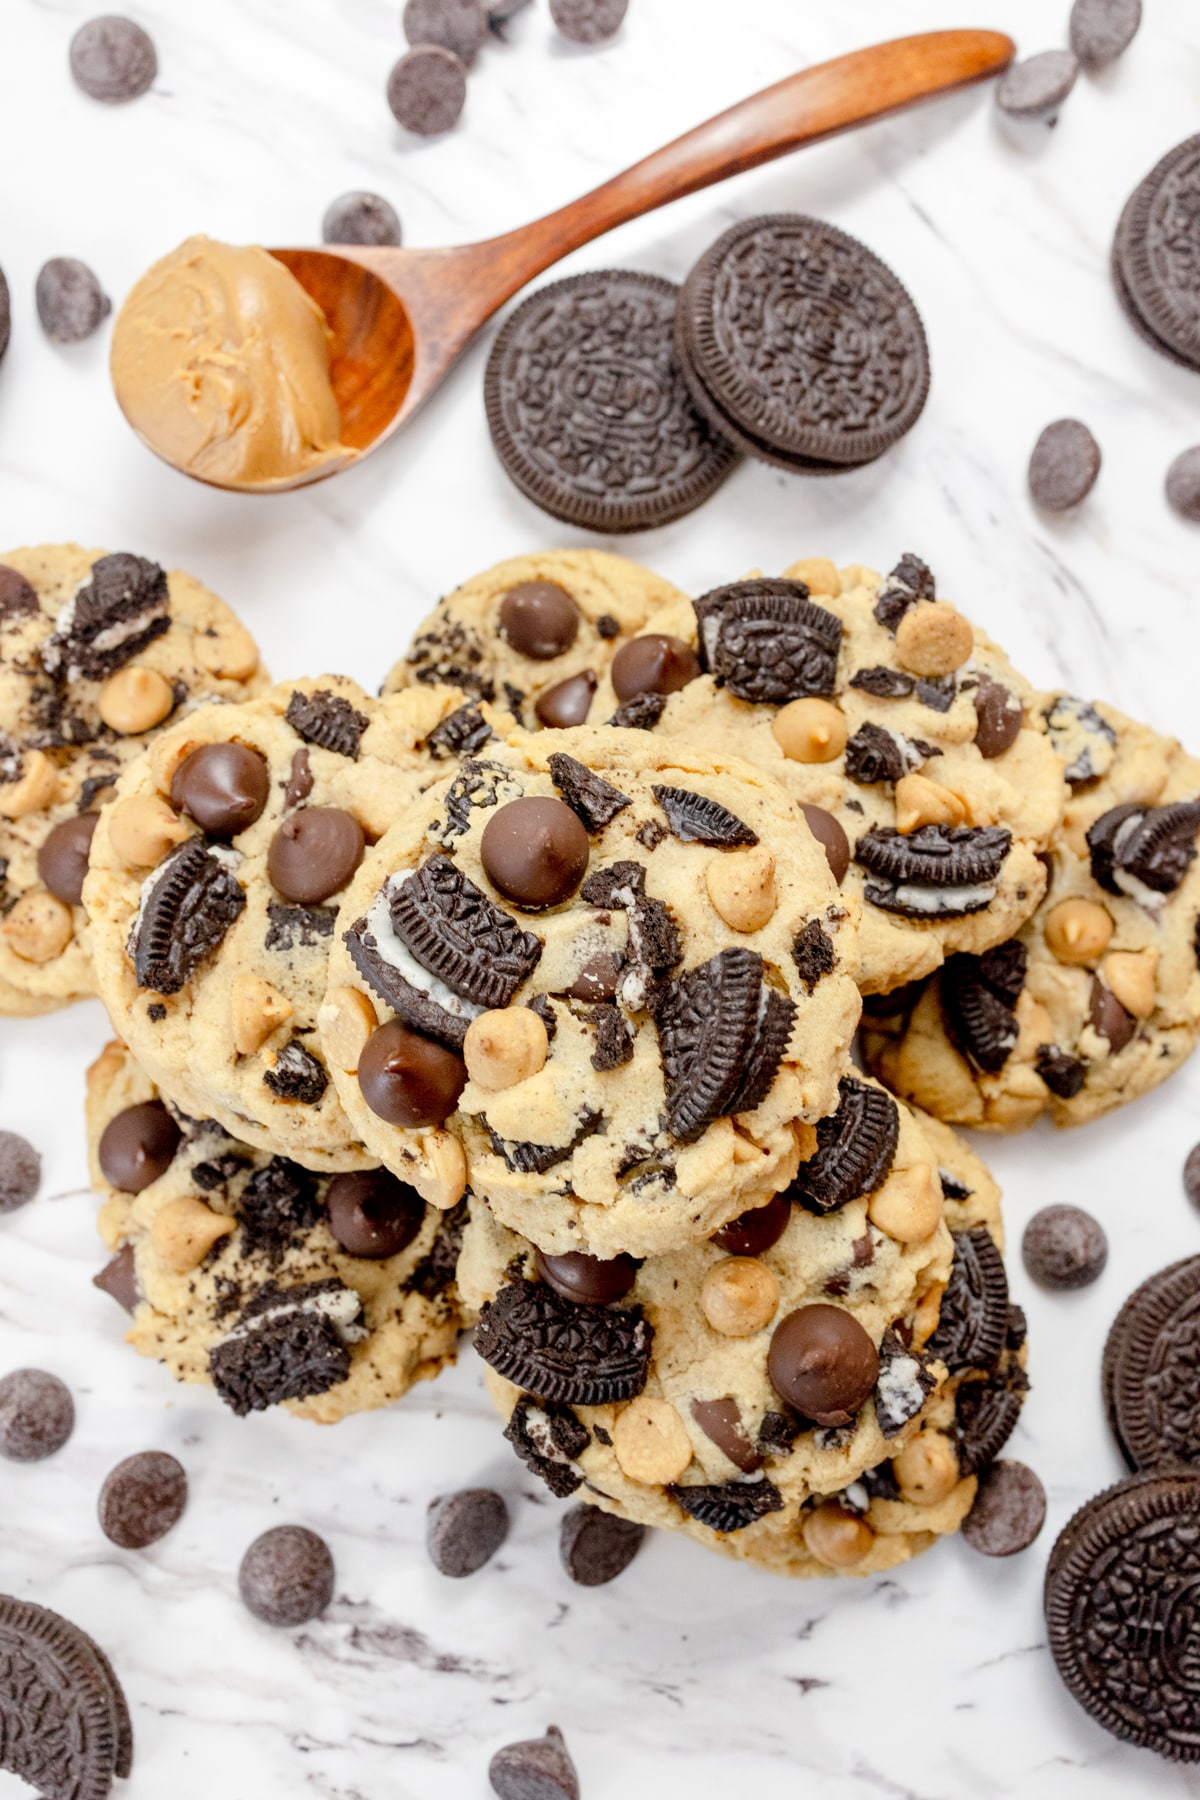 Top view of Peanut Butter Oreo Cookies on a white surface, surrounded by oreo cookies, chocolate chips, and a spoon with peanut butter in it.